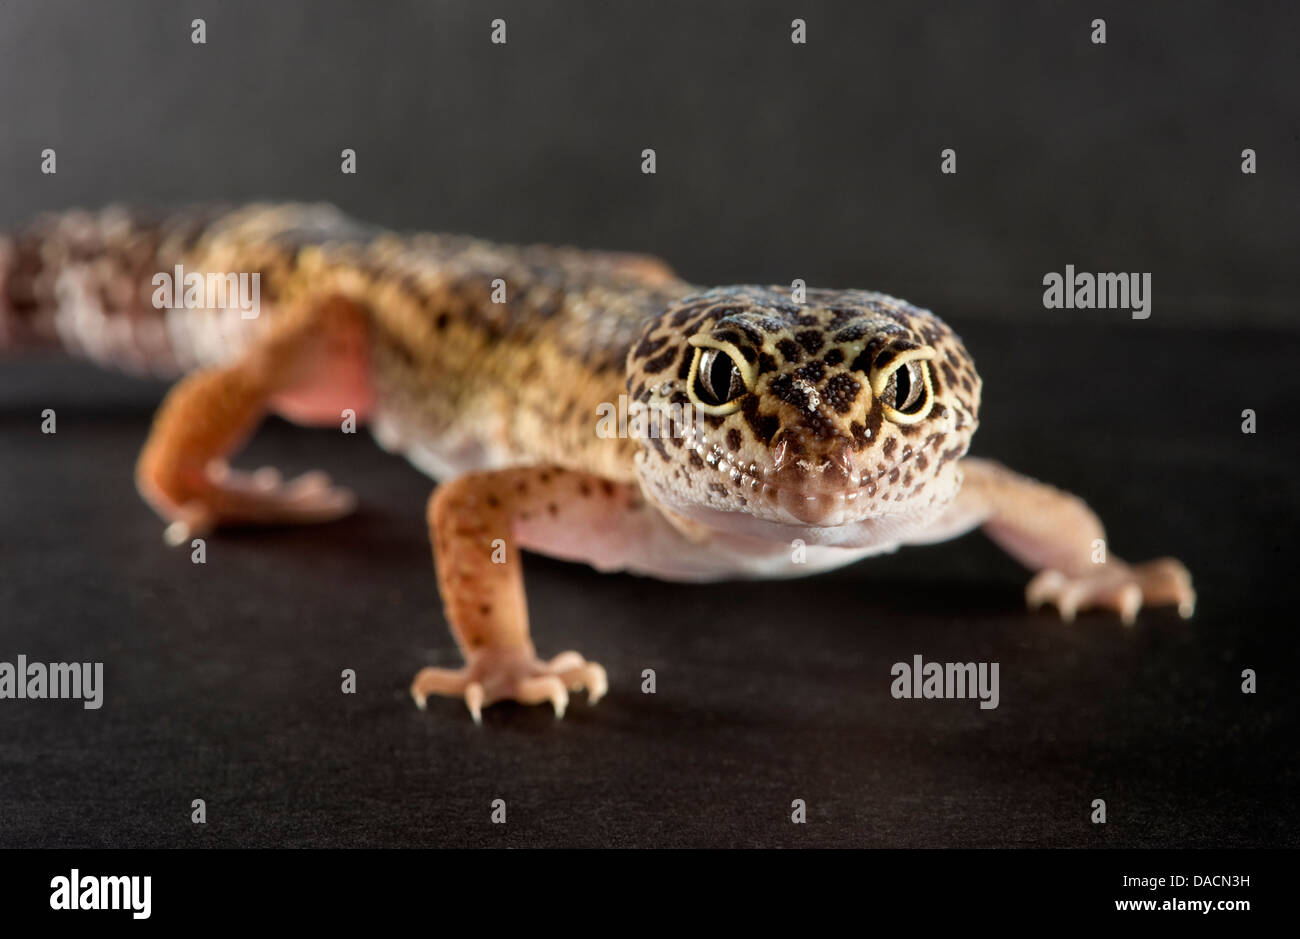 Leopard gecko (Eublepharis macularius) looking at the camera. Stock Photo